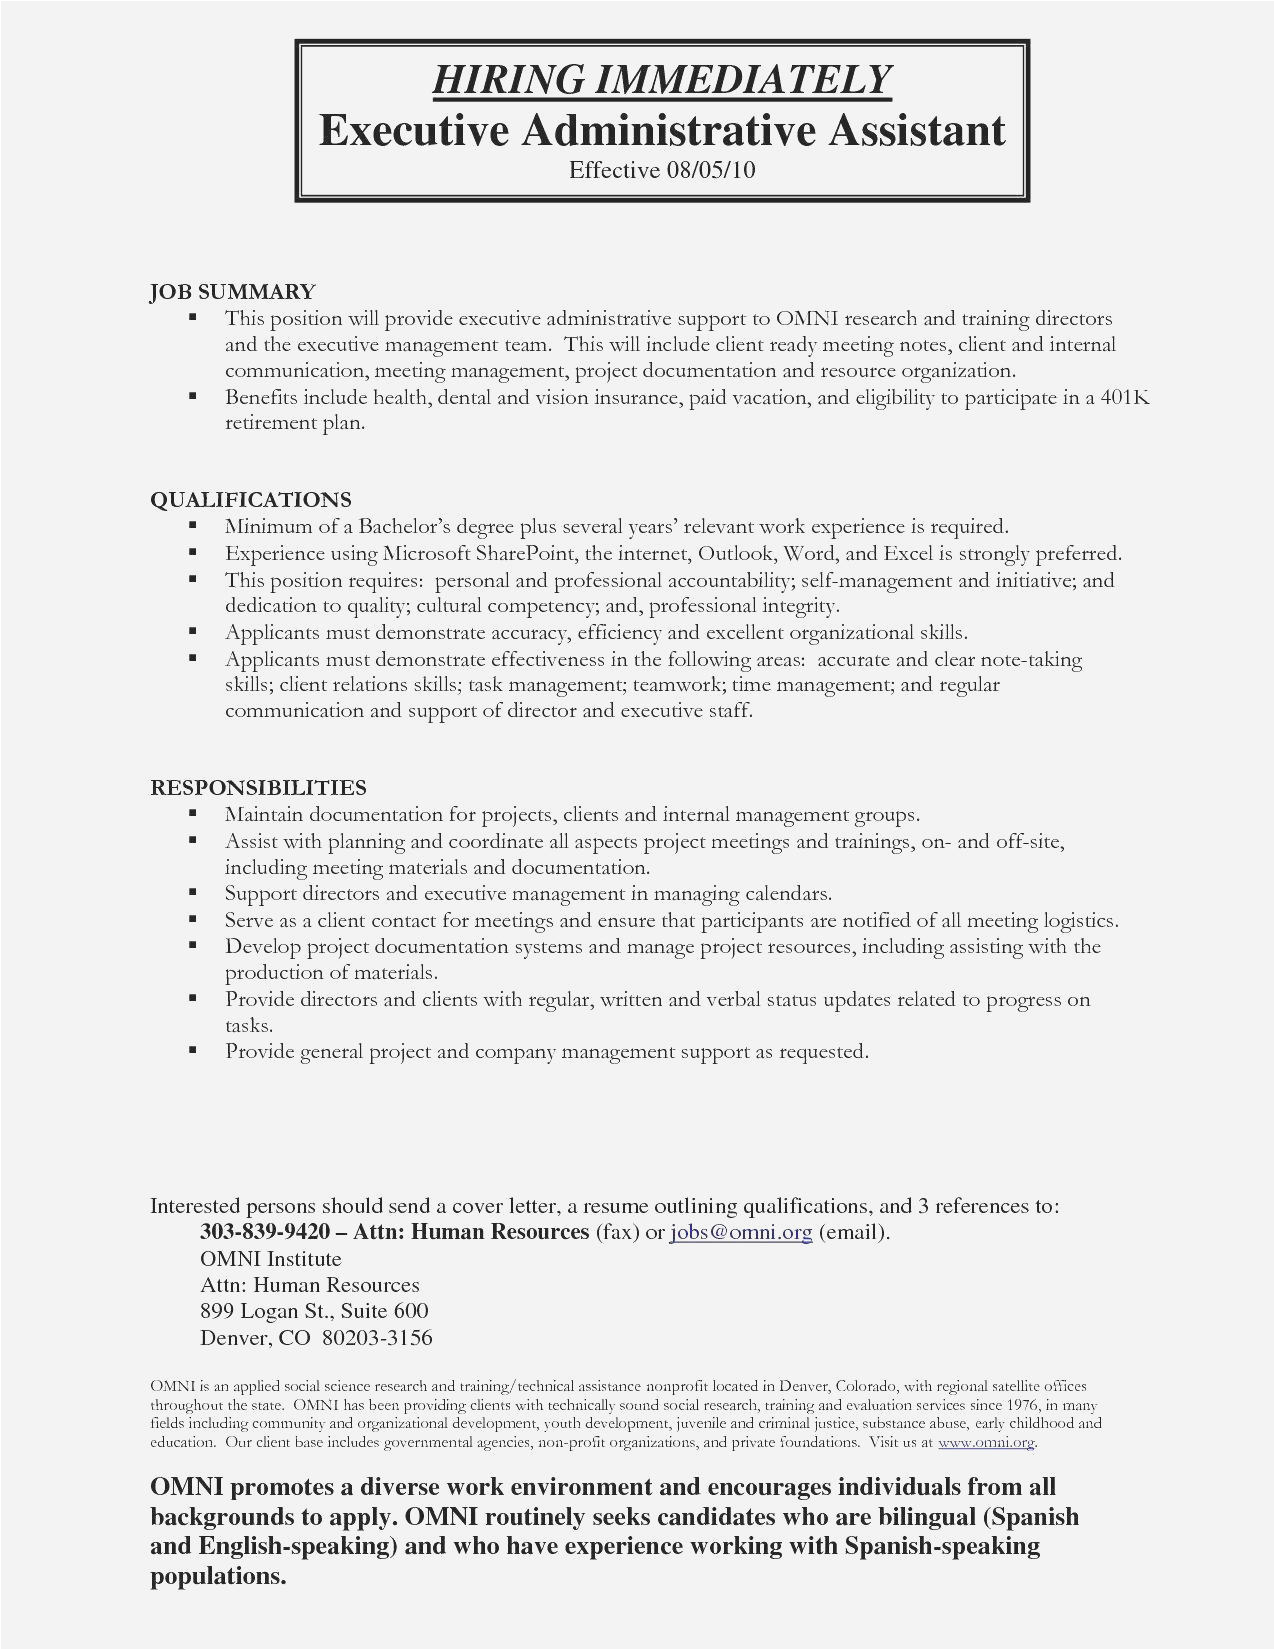 Sample Resume for A Retired Person 51 New Sample Resume for Retired Person Returning to Work